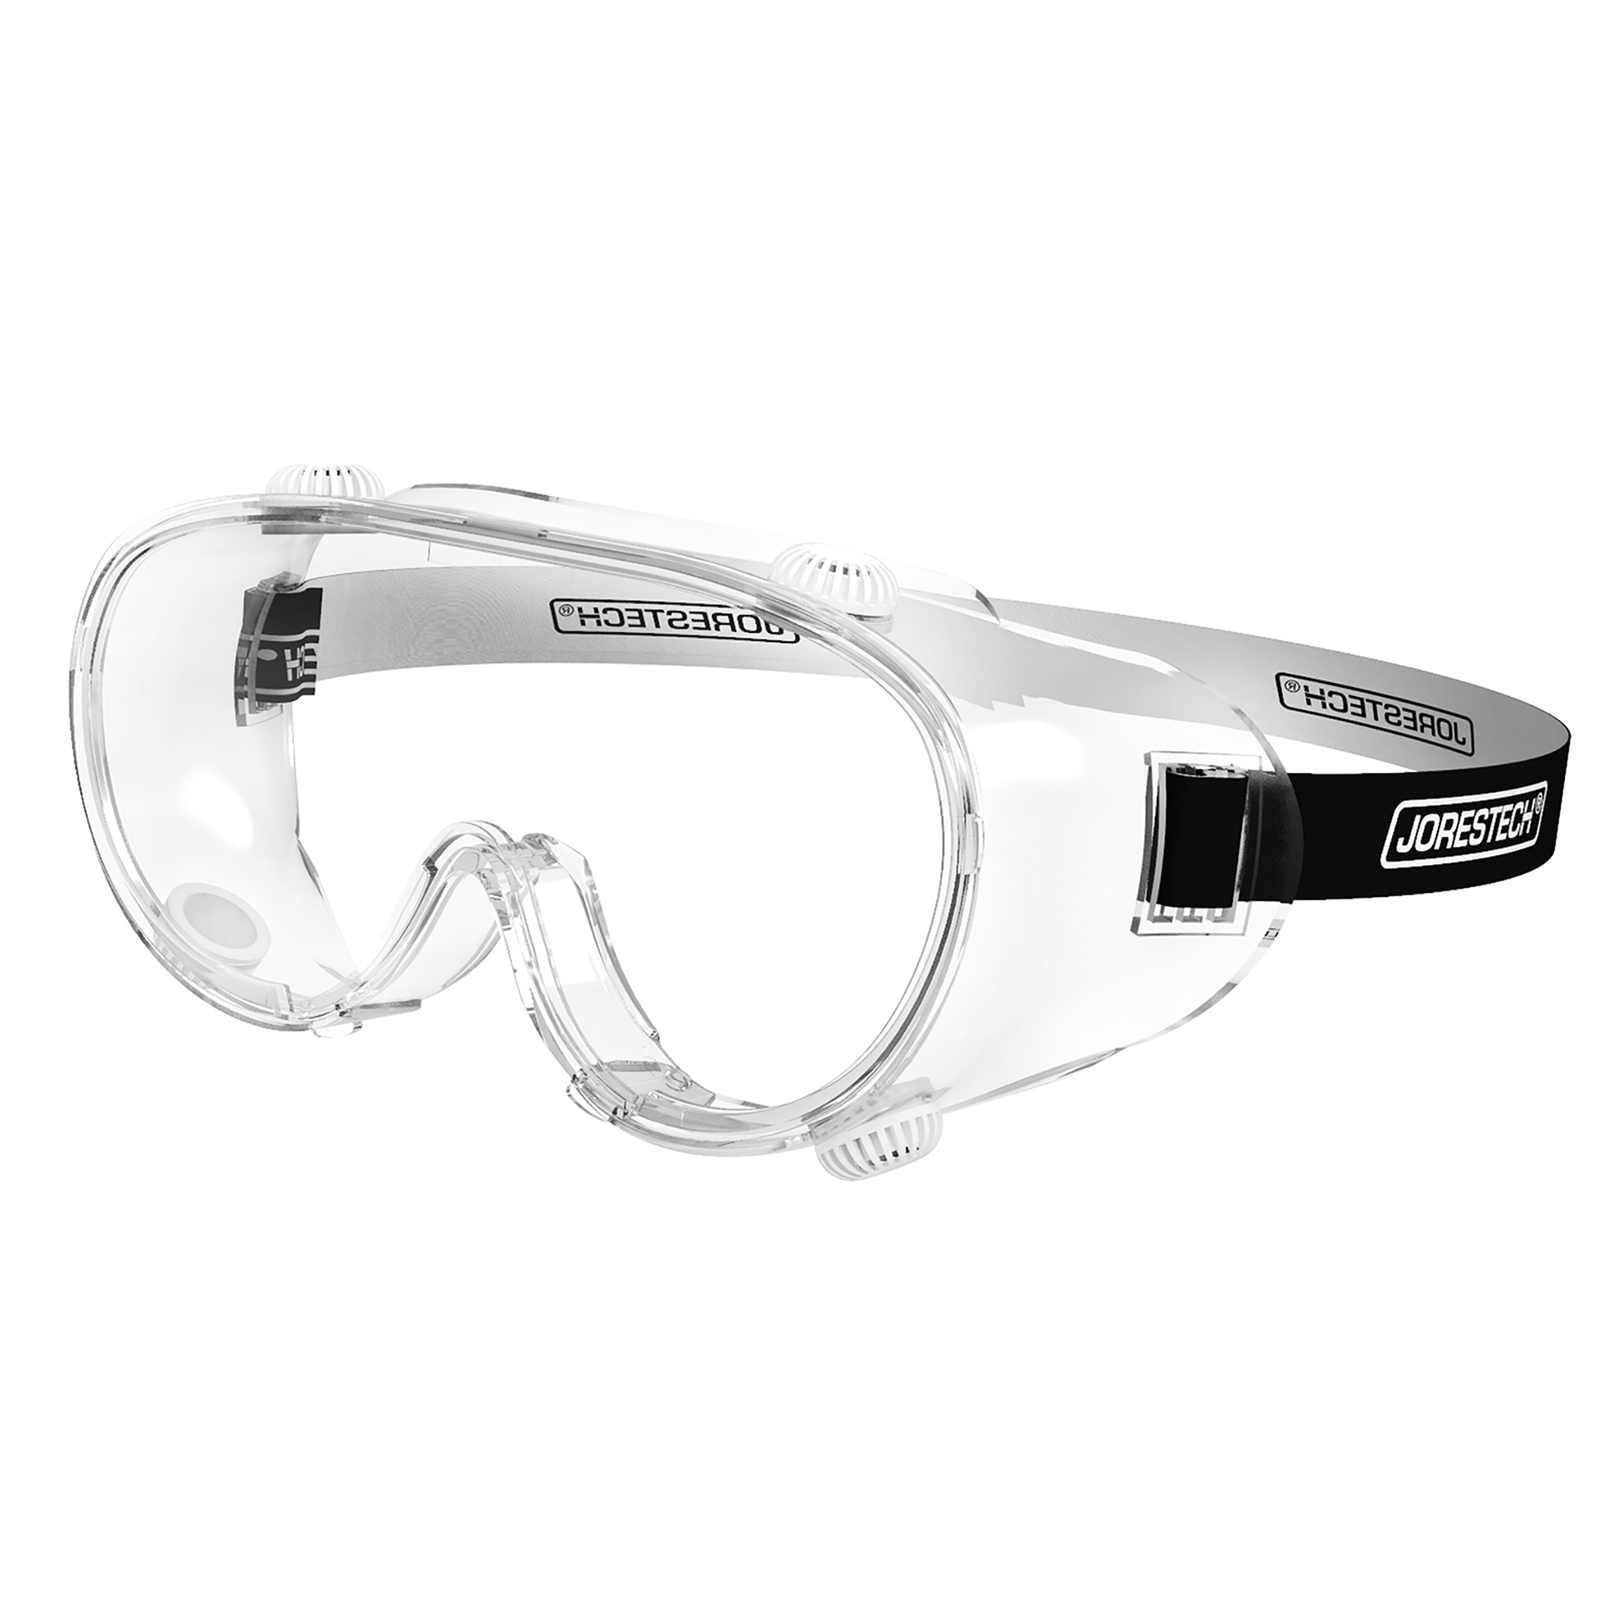 Diagonal view of the anti fog ventilated safety goggles for high impact eye protection with elactic head band